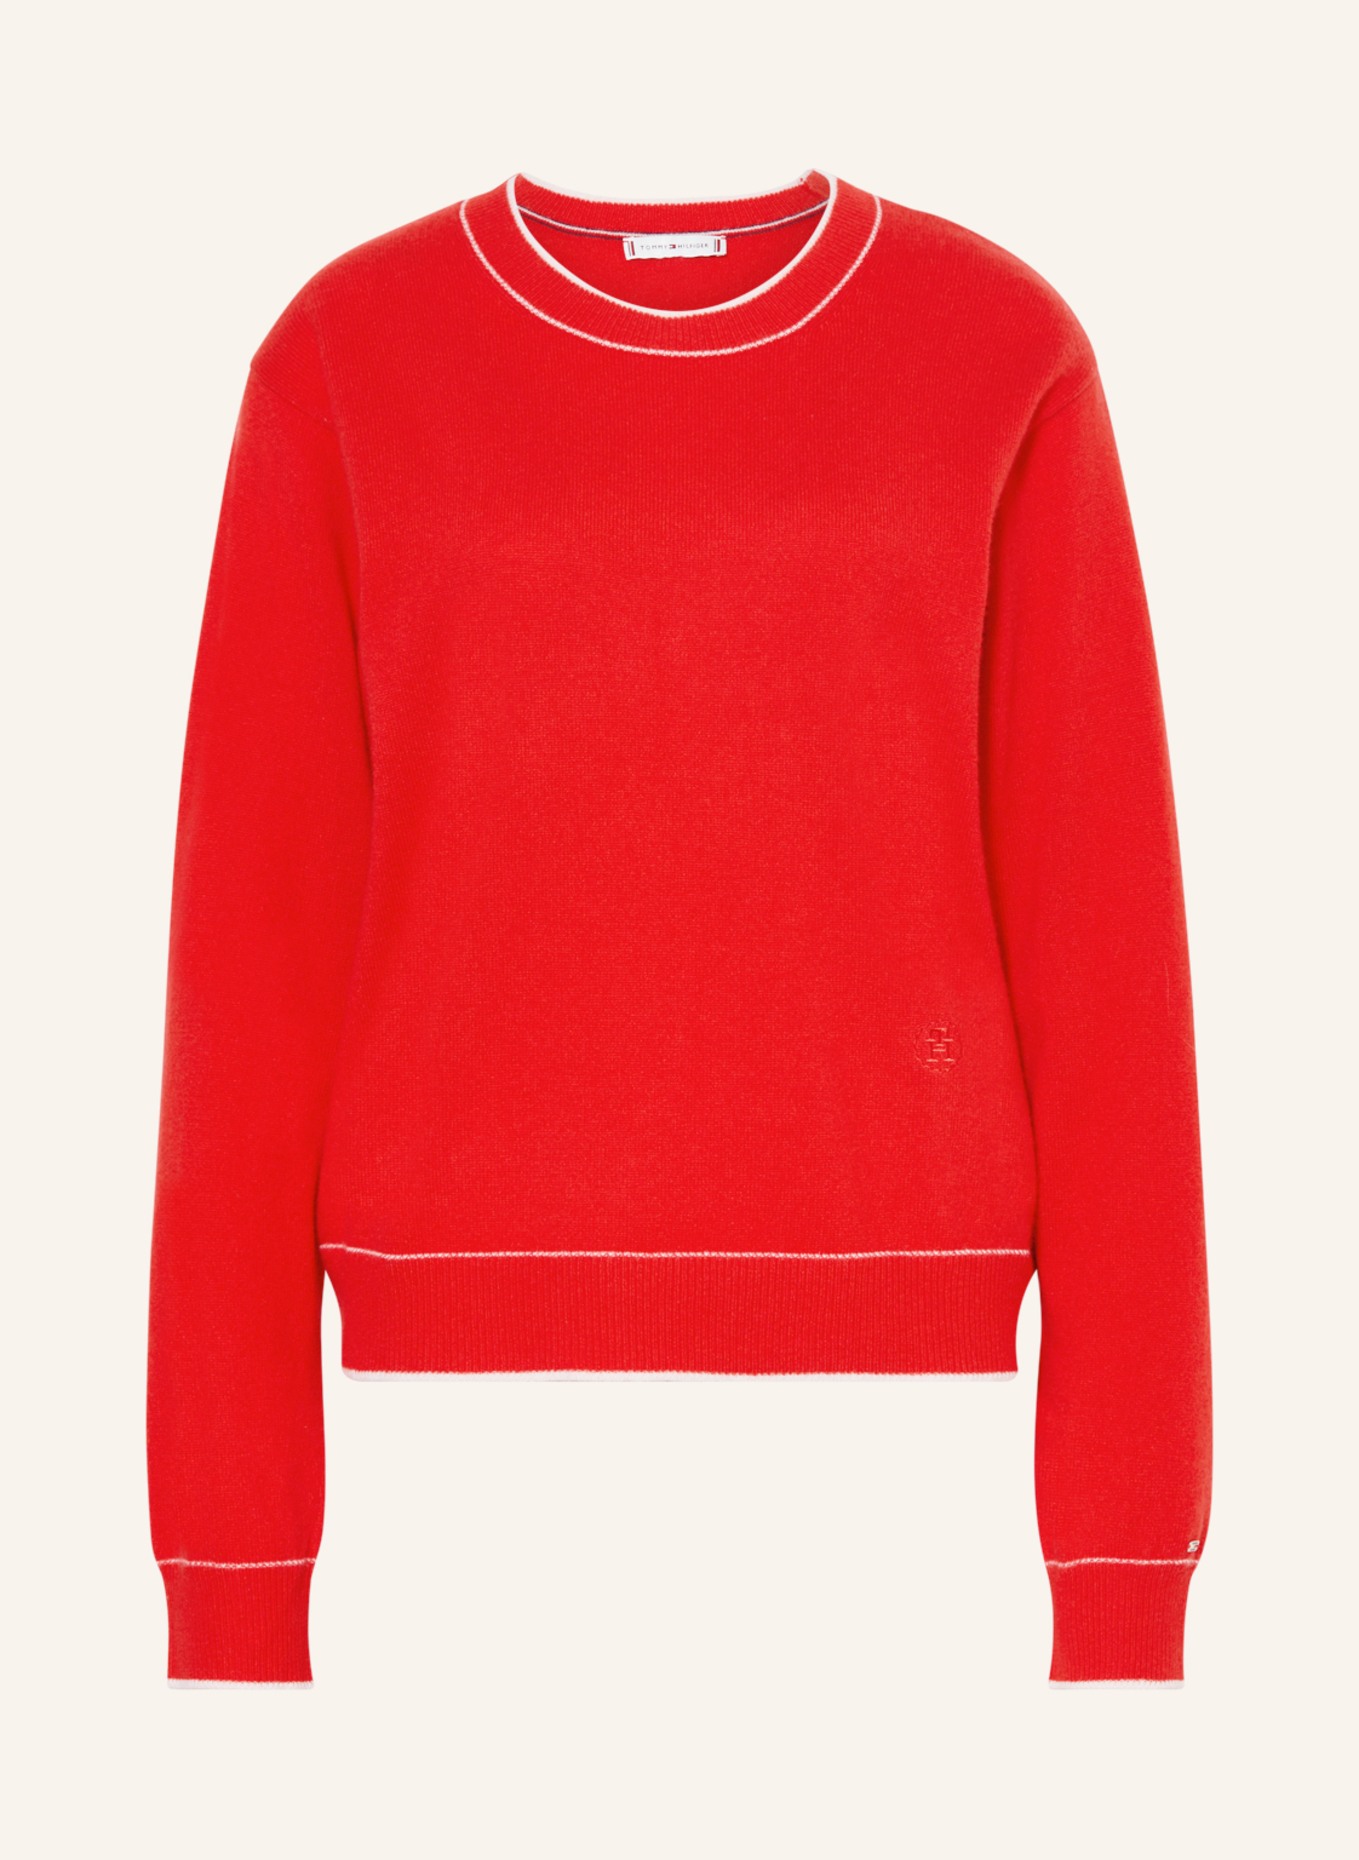 TOMMY HILFIGER Cashmere-Pullover, Farbe: ROT (Bild 1)